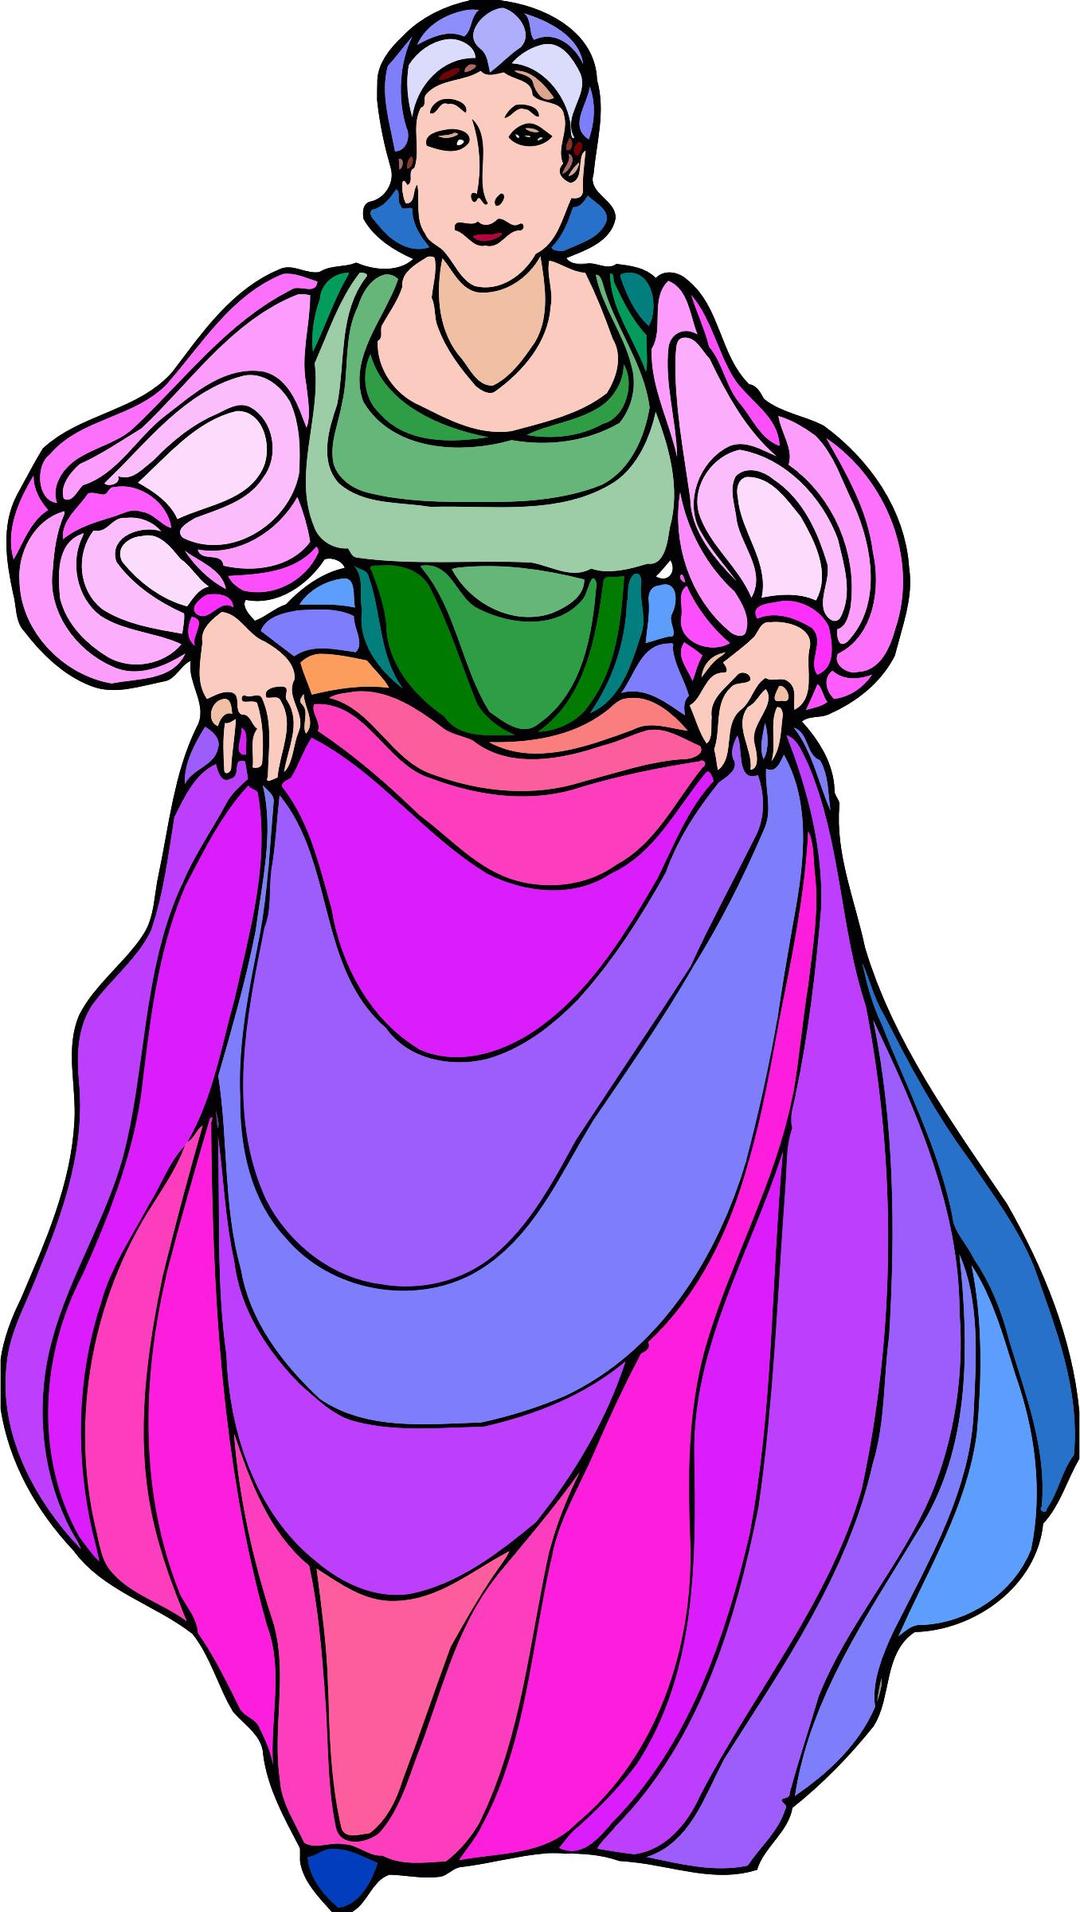 Shakespeare characters - Maria (colour) png transparent